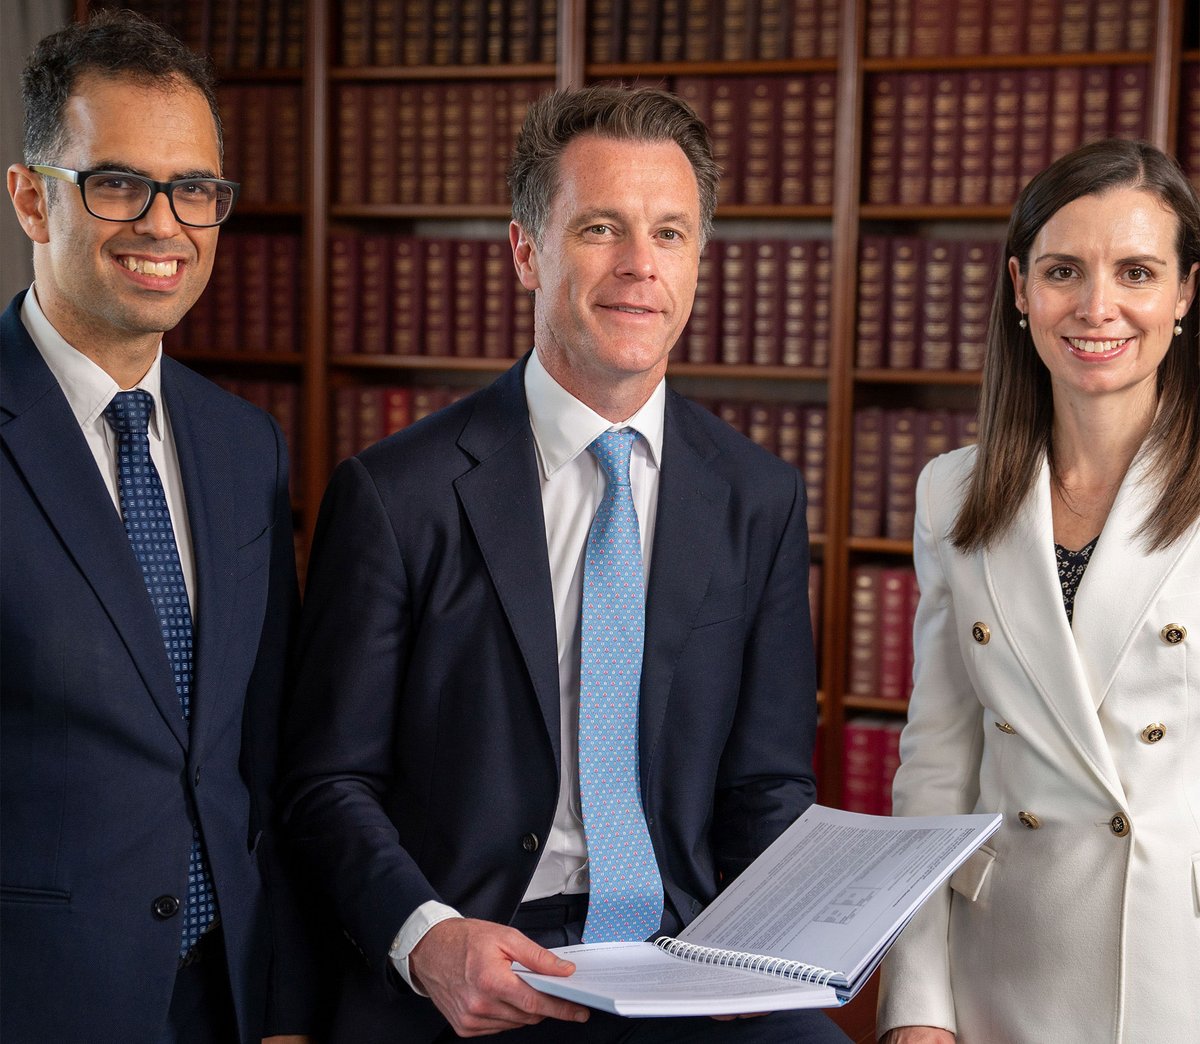 THE Minns government has unveiled a $2.2 billion #housing plan at the centre of its first budget after winning the NSW election, which includes more support for #socialhousing and #affordablehousing. #NSWBudget #NSWpol #housingsupply #planningreform

australianpropertyjournal.com.au/2023/09/19/nsw…